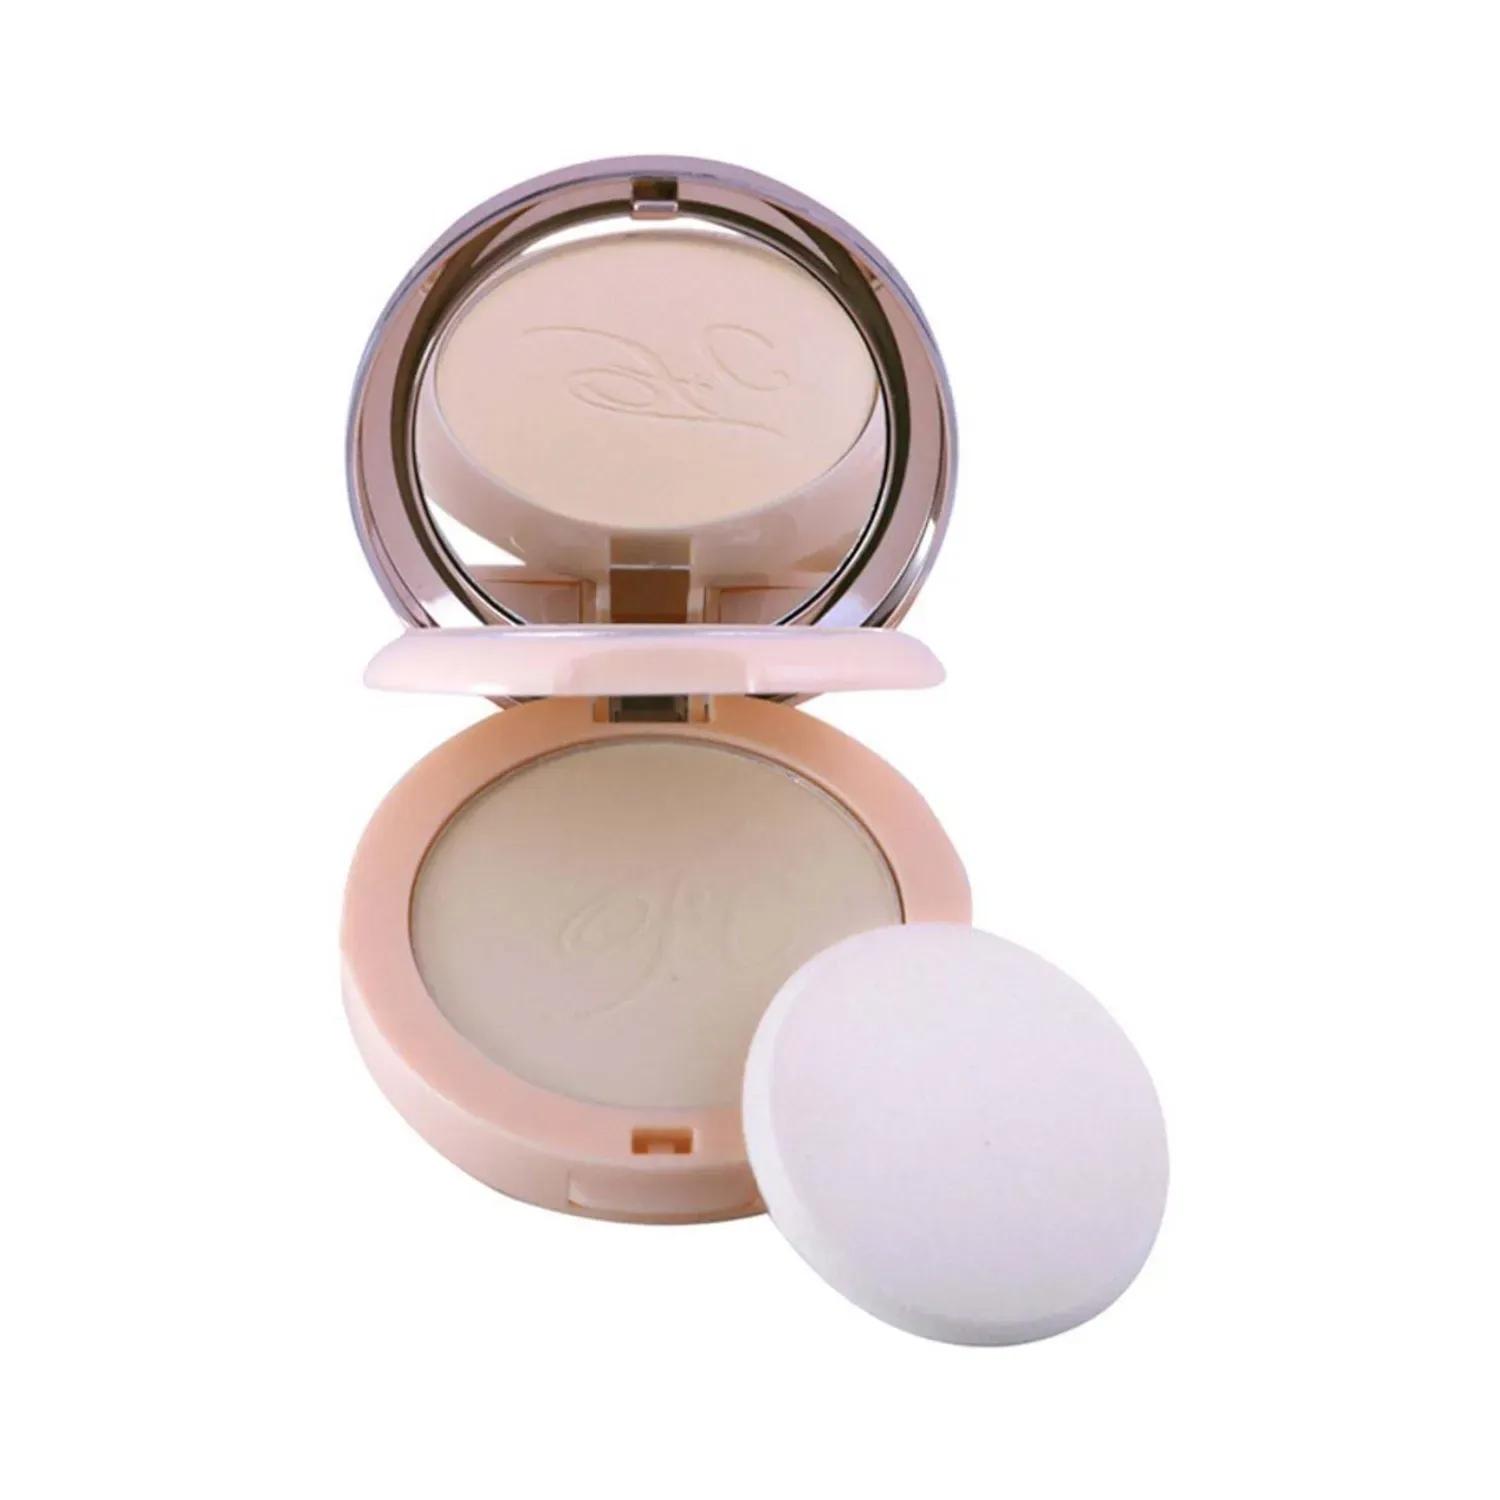 fashion colour nude makeover 2-in-1 compact face powder - 01 shade (20g)